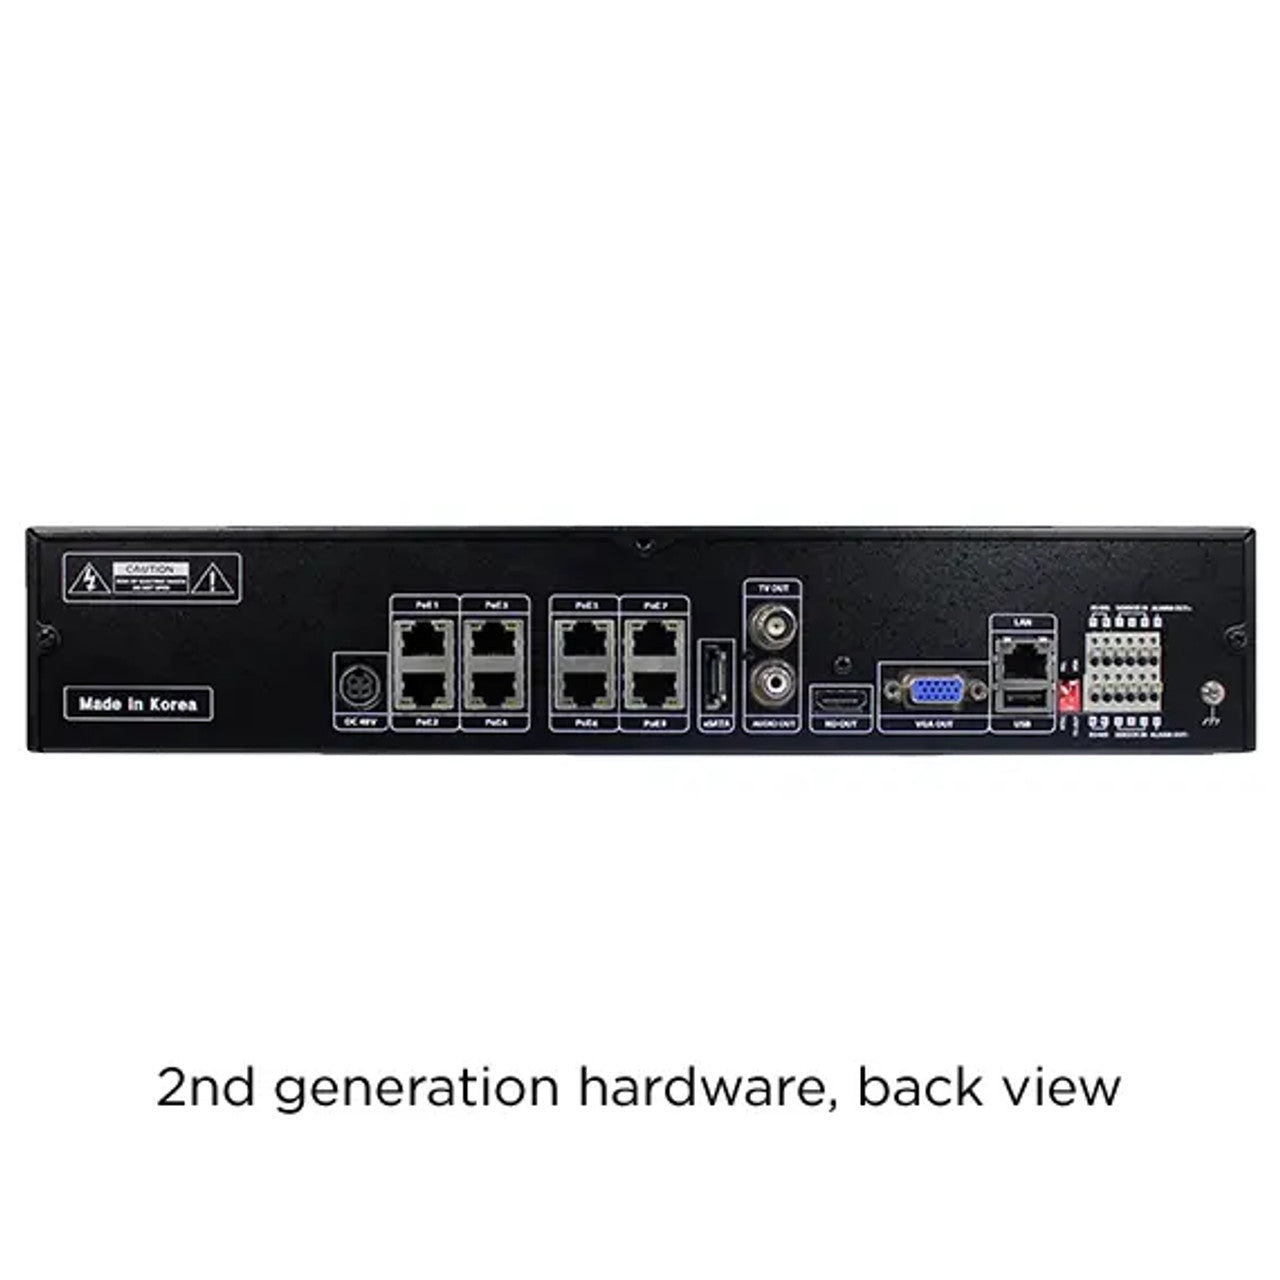 Digital Watchdog DW-VP123T8P 8-channel VMAX IP Plus PoE NVR with 4 virtual channels, 3TB HDD included